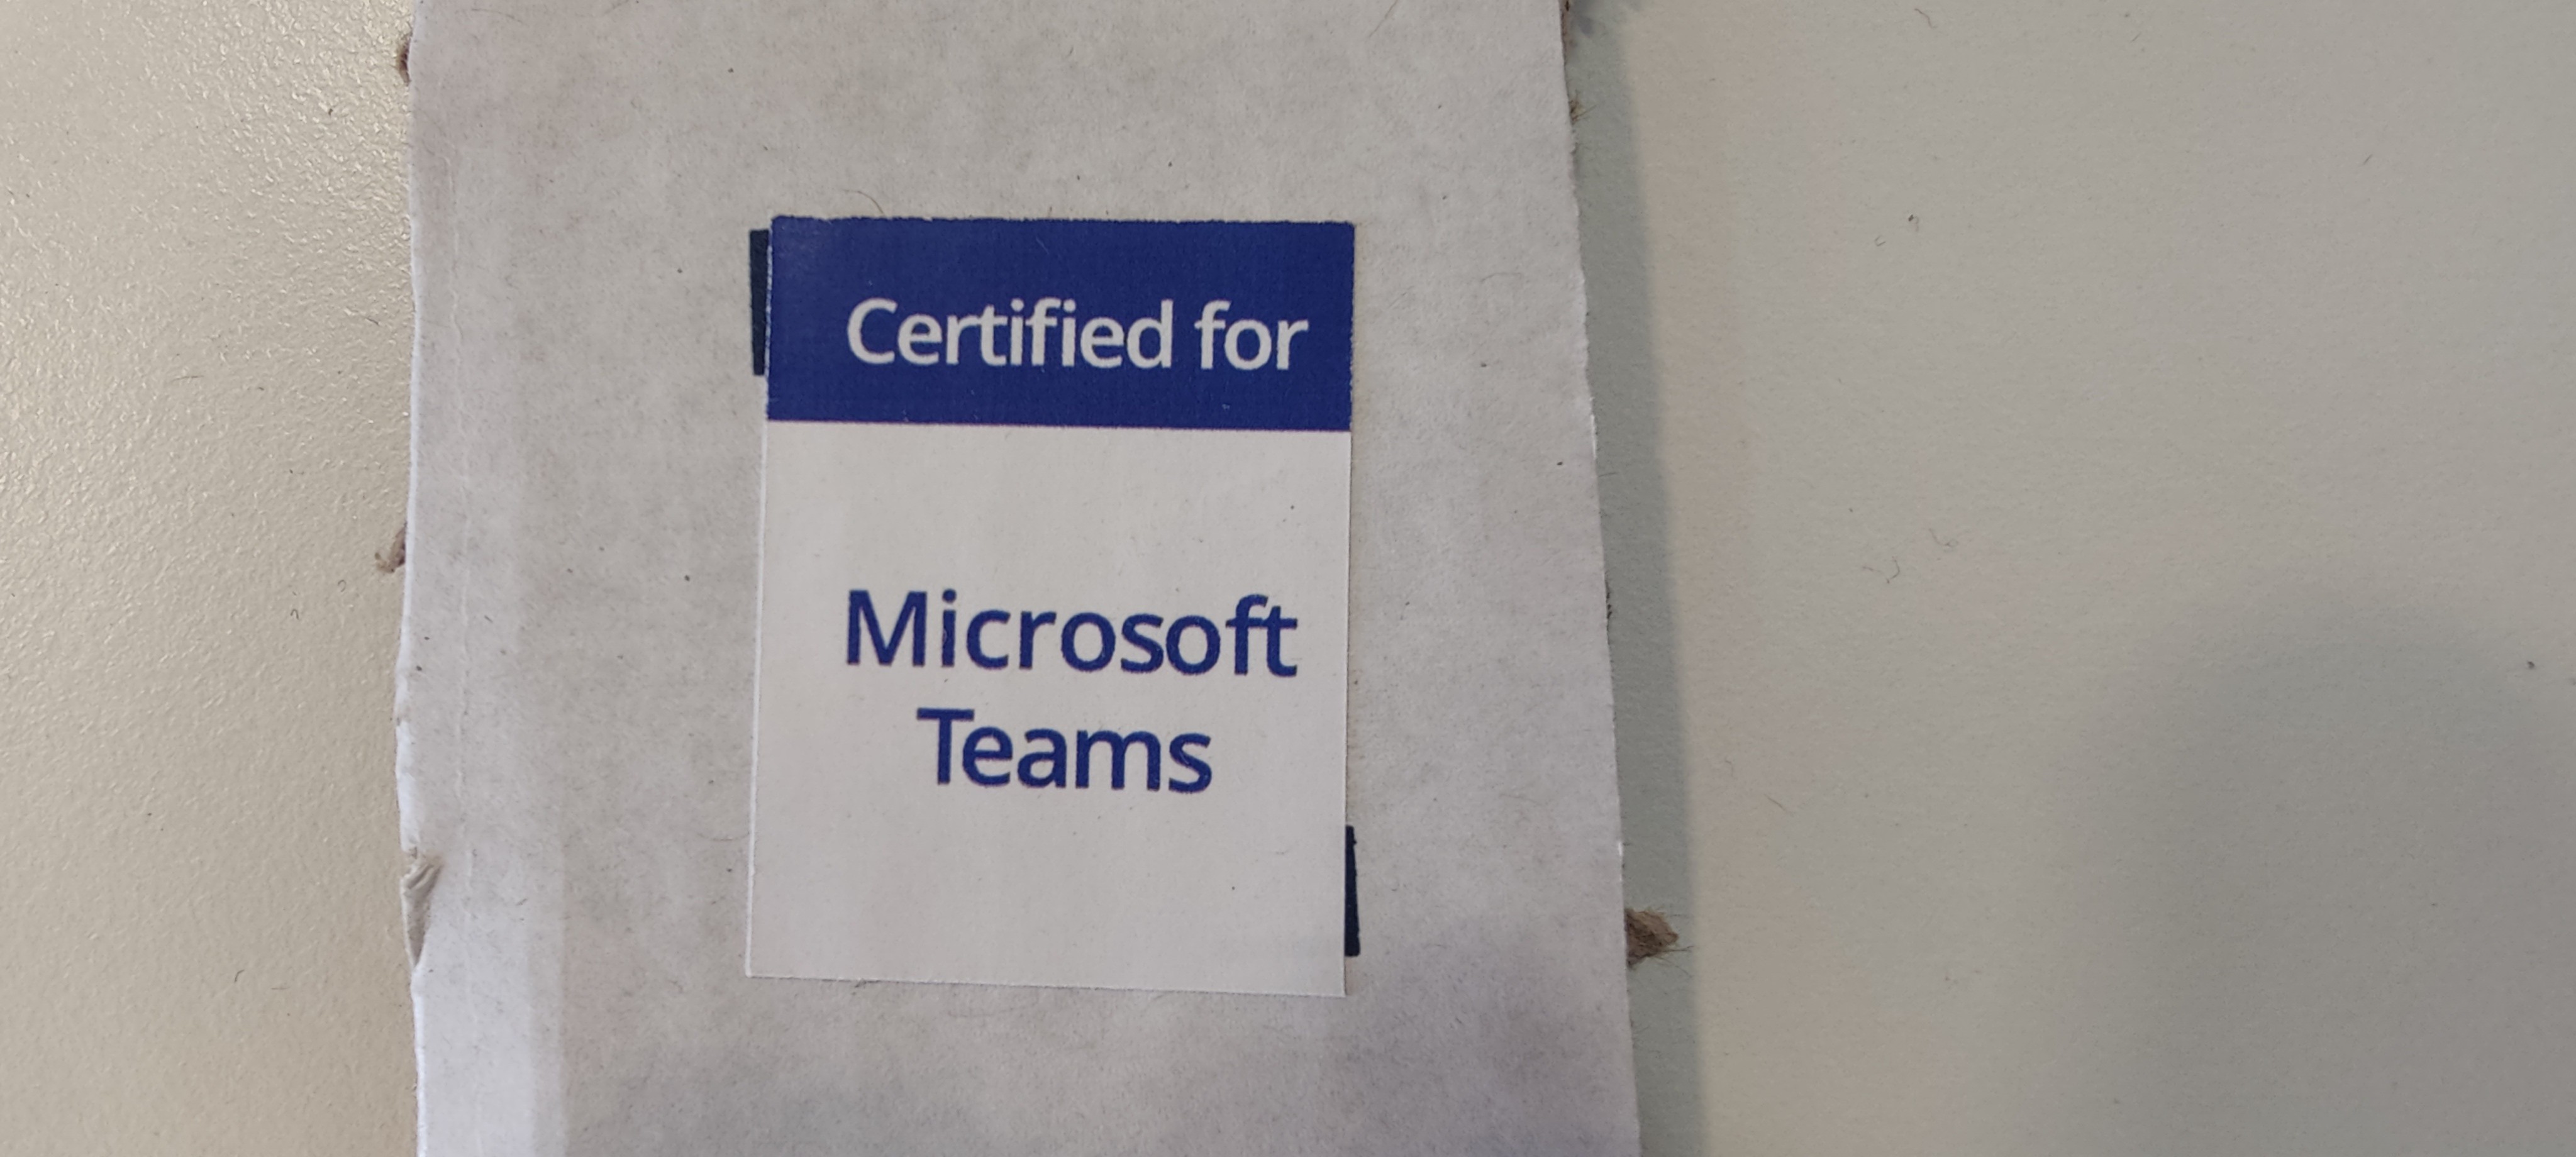 Certified for Microsoft Teams